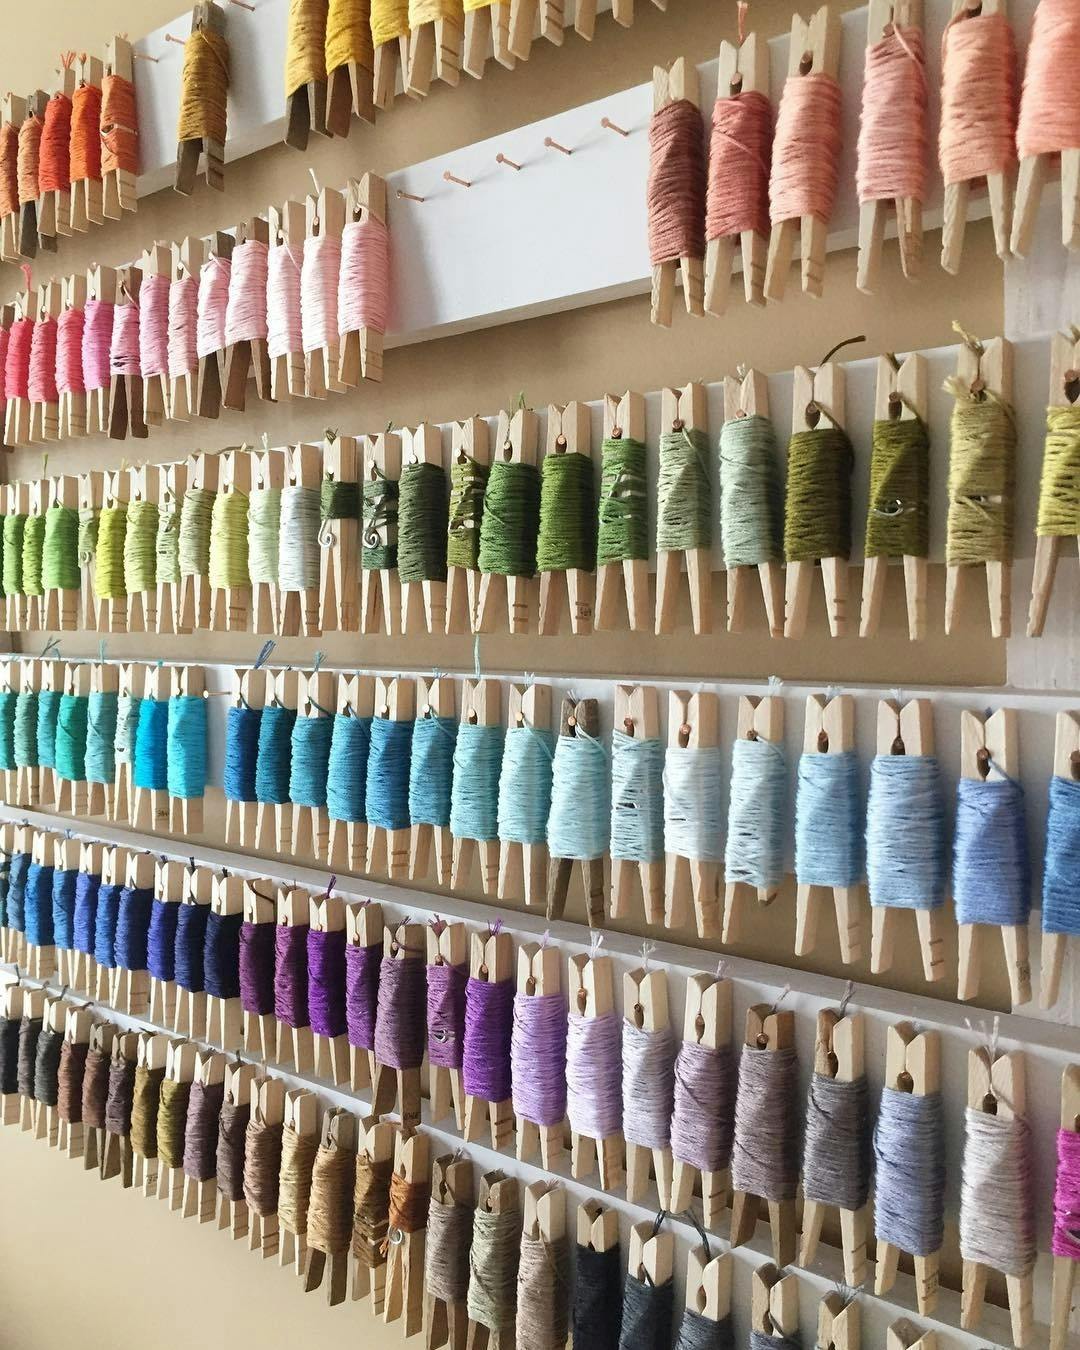 Embroidery floss wrapped around clothes pins